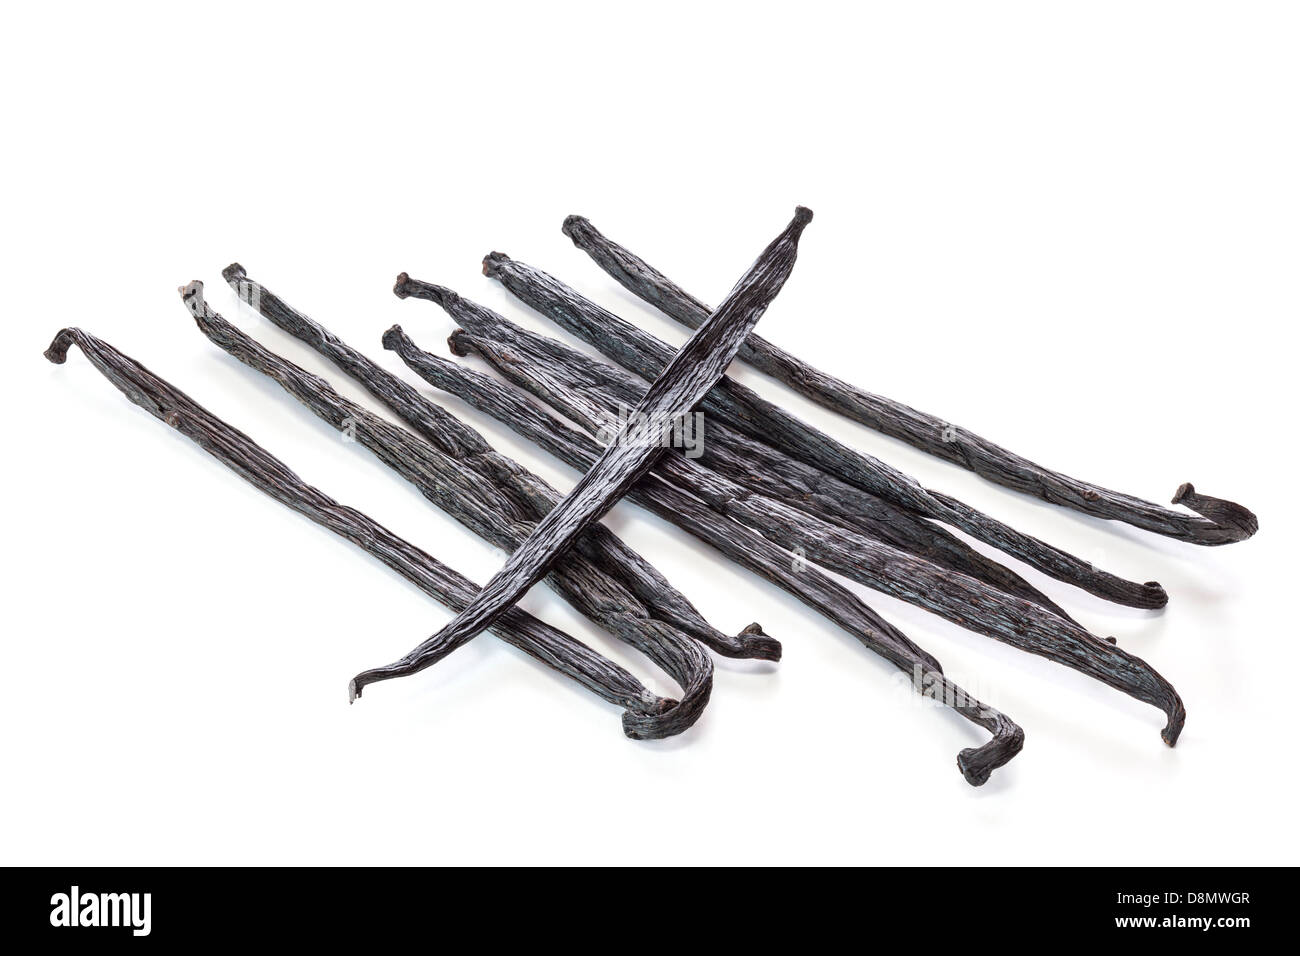 Vanilla beans on white background with soft shadow. Focus stack, in focus front to back. Stock Photo